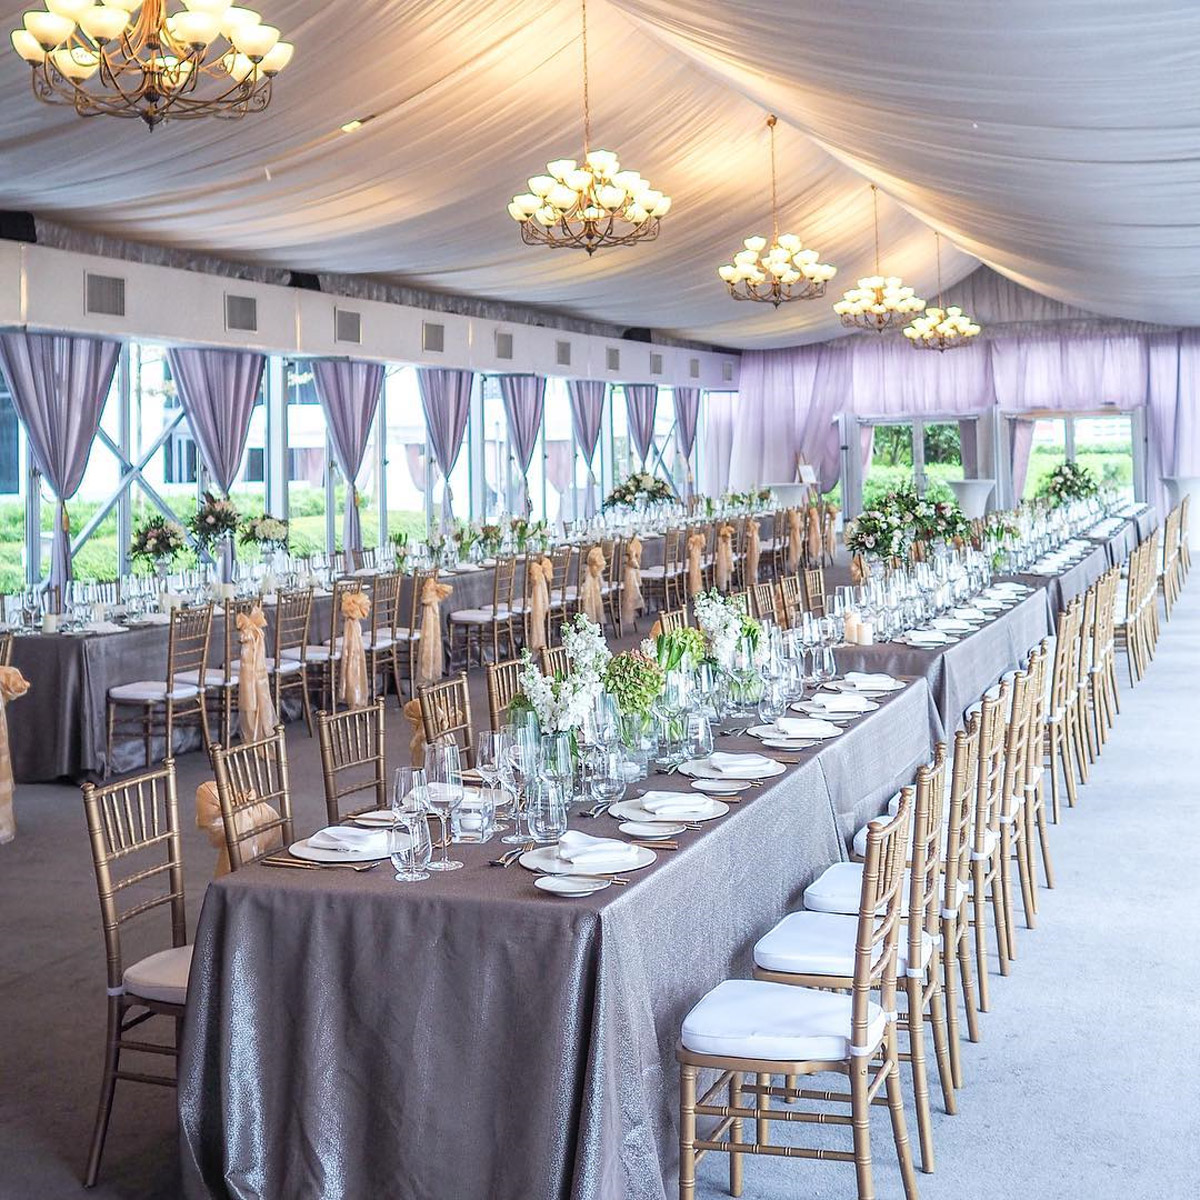 6 Questions to Ask Yourself Before Securing A Wedding Venue